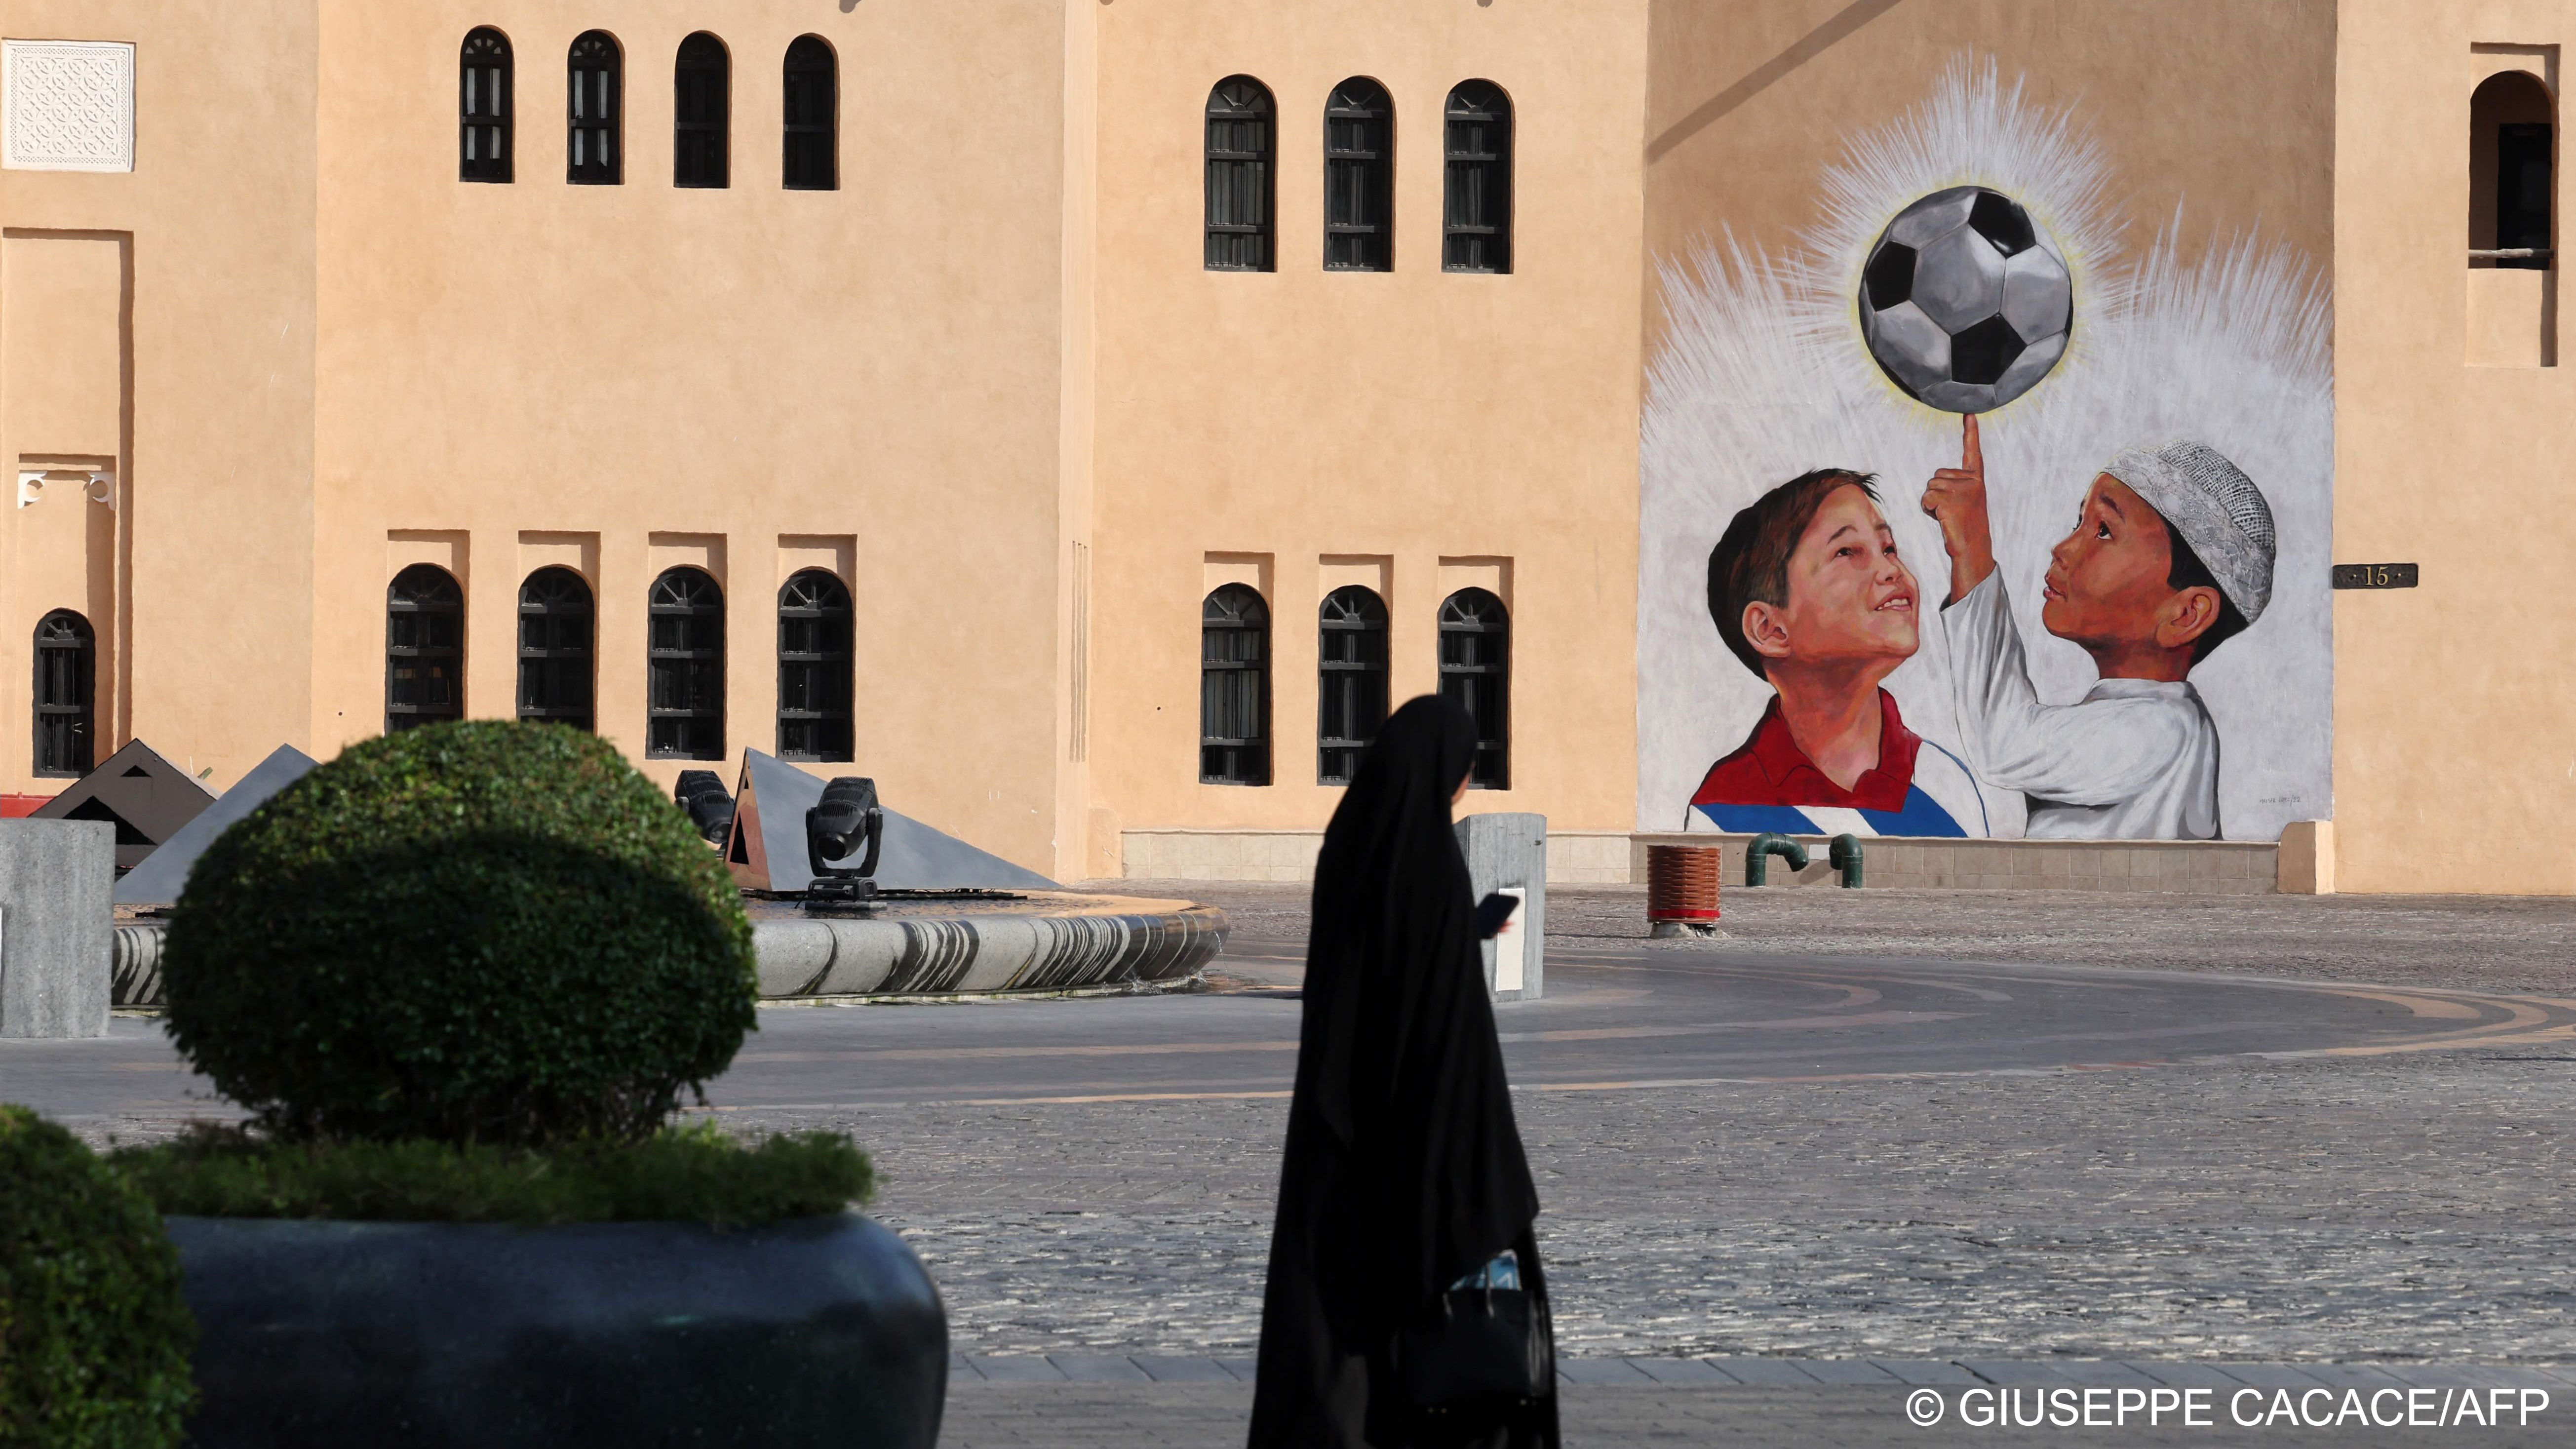 A woman walks past a mural in the Katara Cultural Village, in Qatar's capital Doha, on October 11, 2022 ahead of the FIFA 2022 football World Cup (photo: Giuseppe CACACE/AFP) 